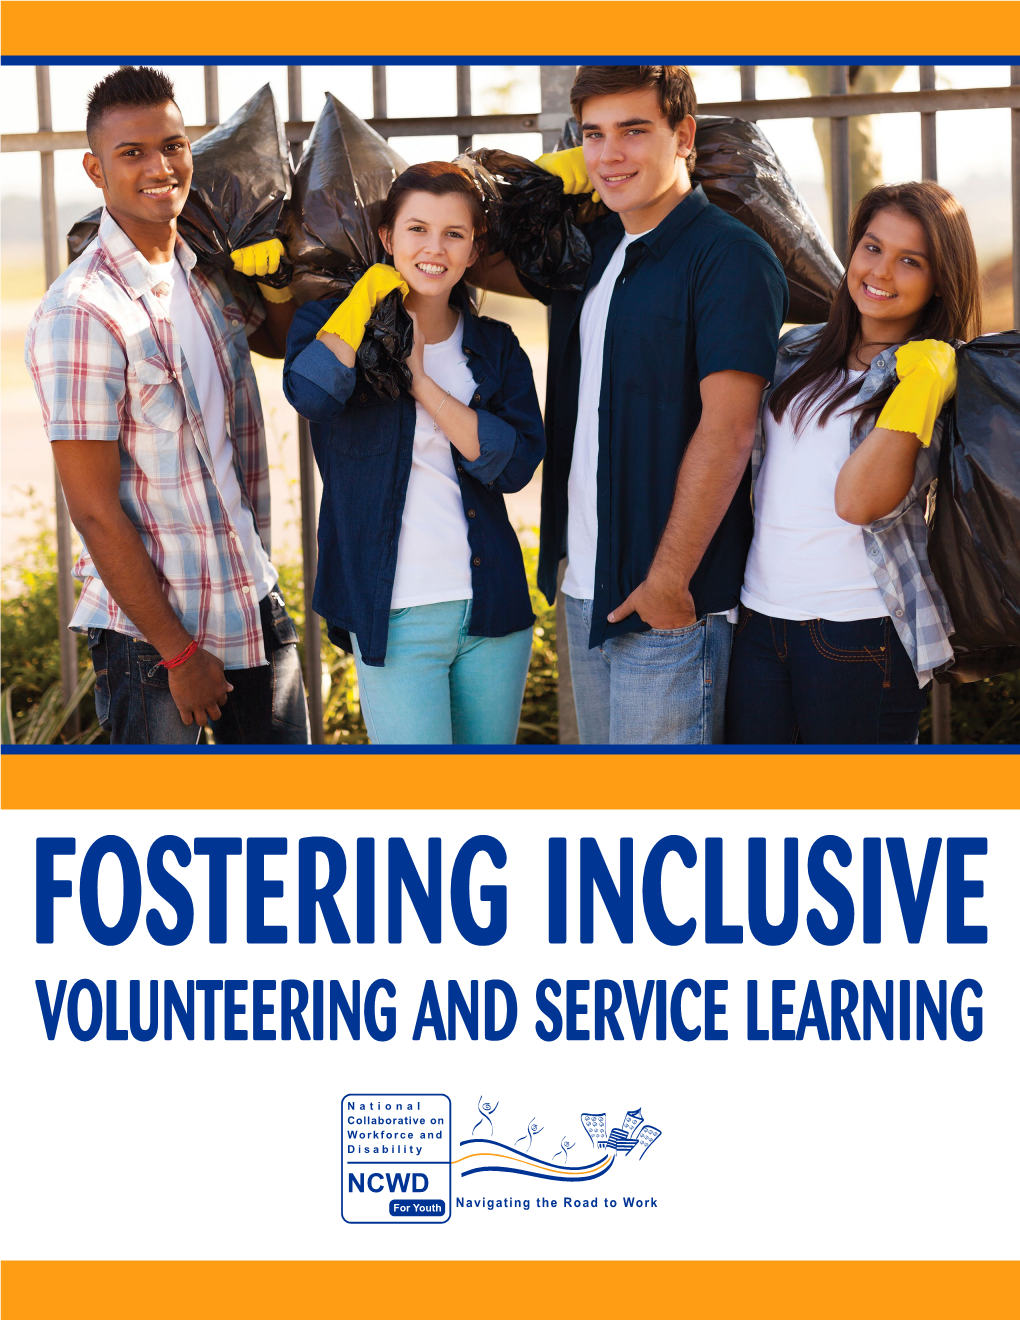 Fostering Inclusive Volunteering and Service Learning